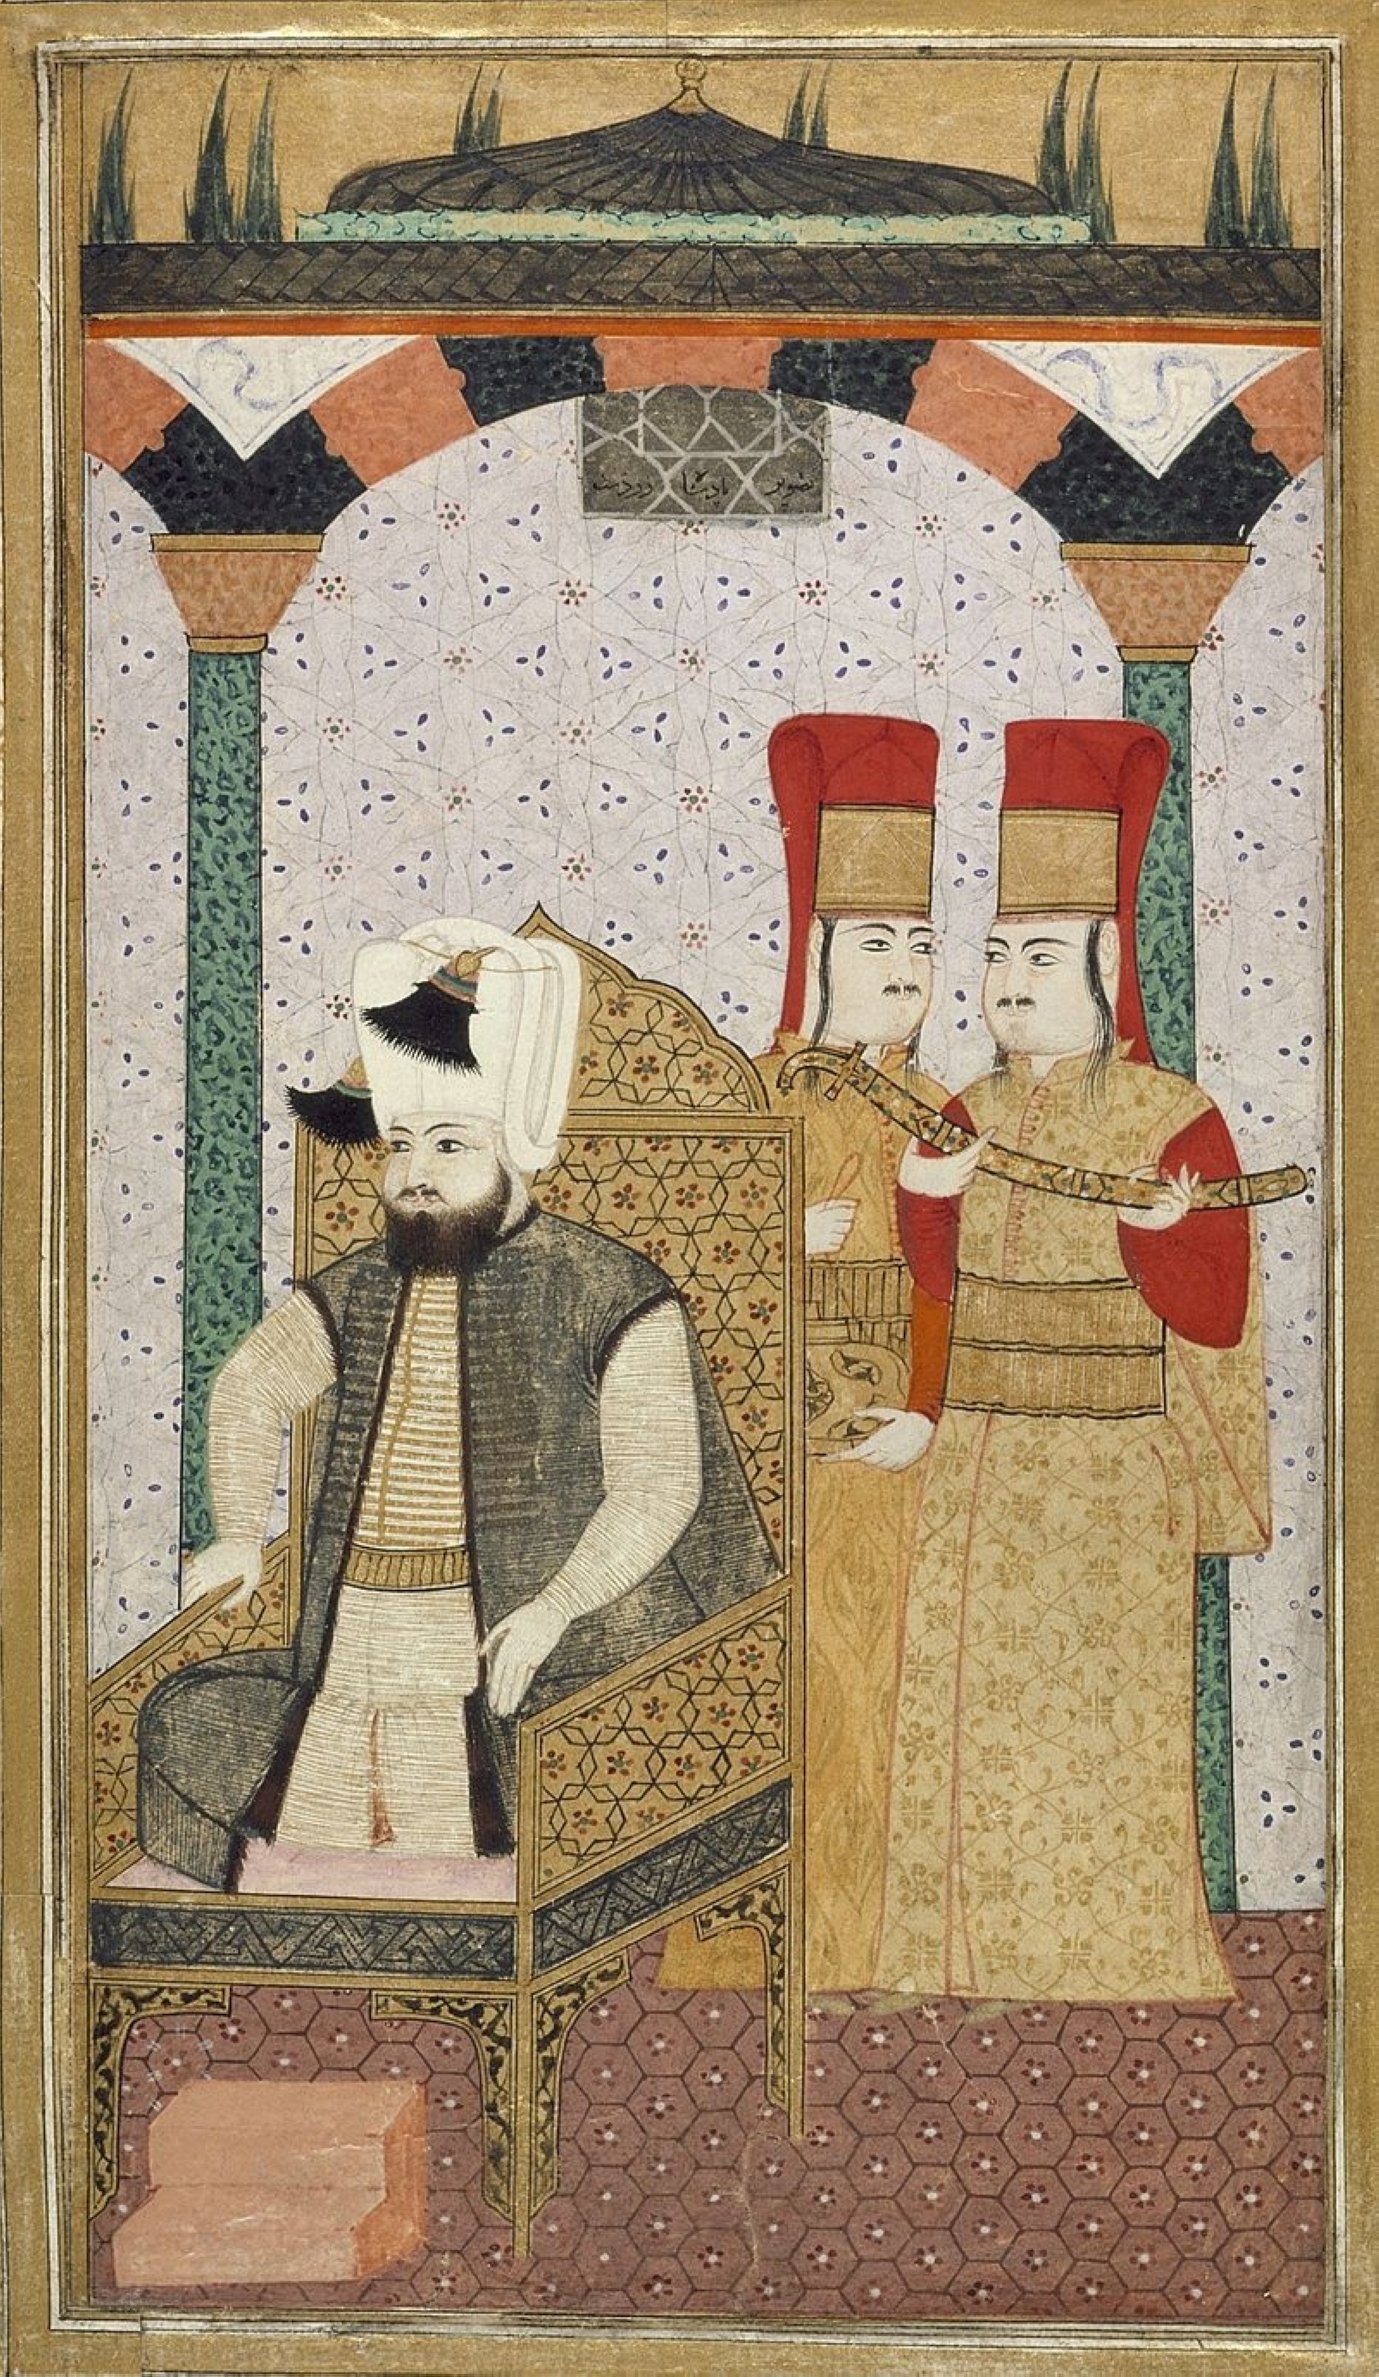 A miniature shows Sultan Mehmed III with two janissaries.